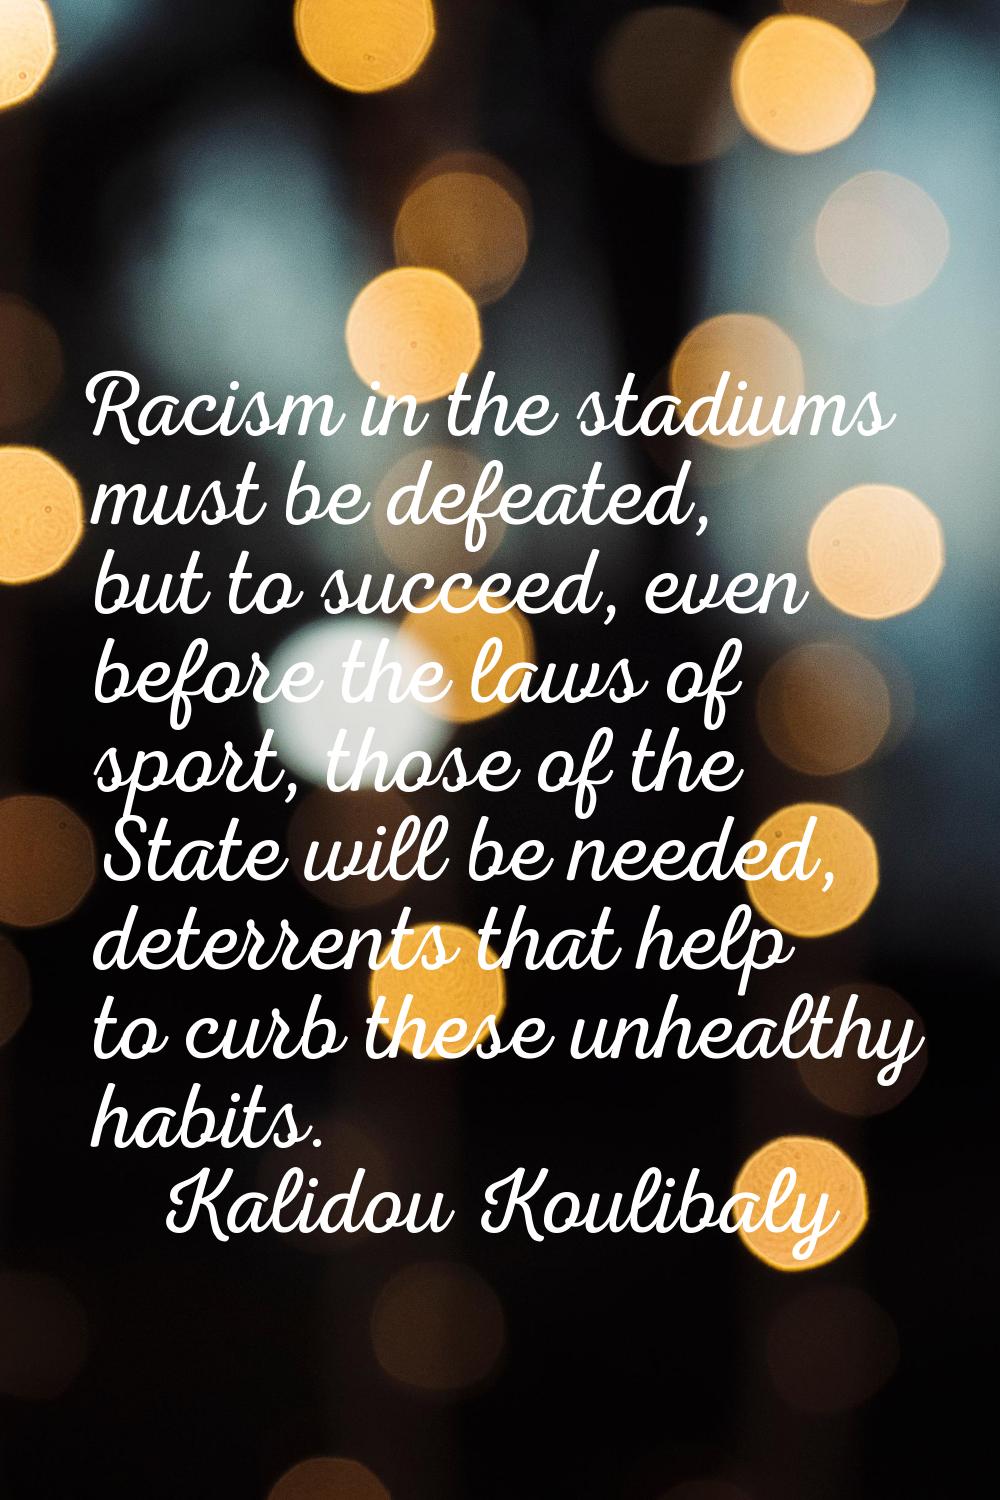 Racism in the stadiums must be defeated, but to succeed, even before the laws of sport, those of th